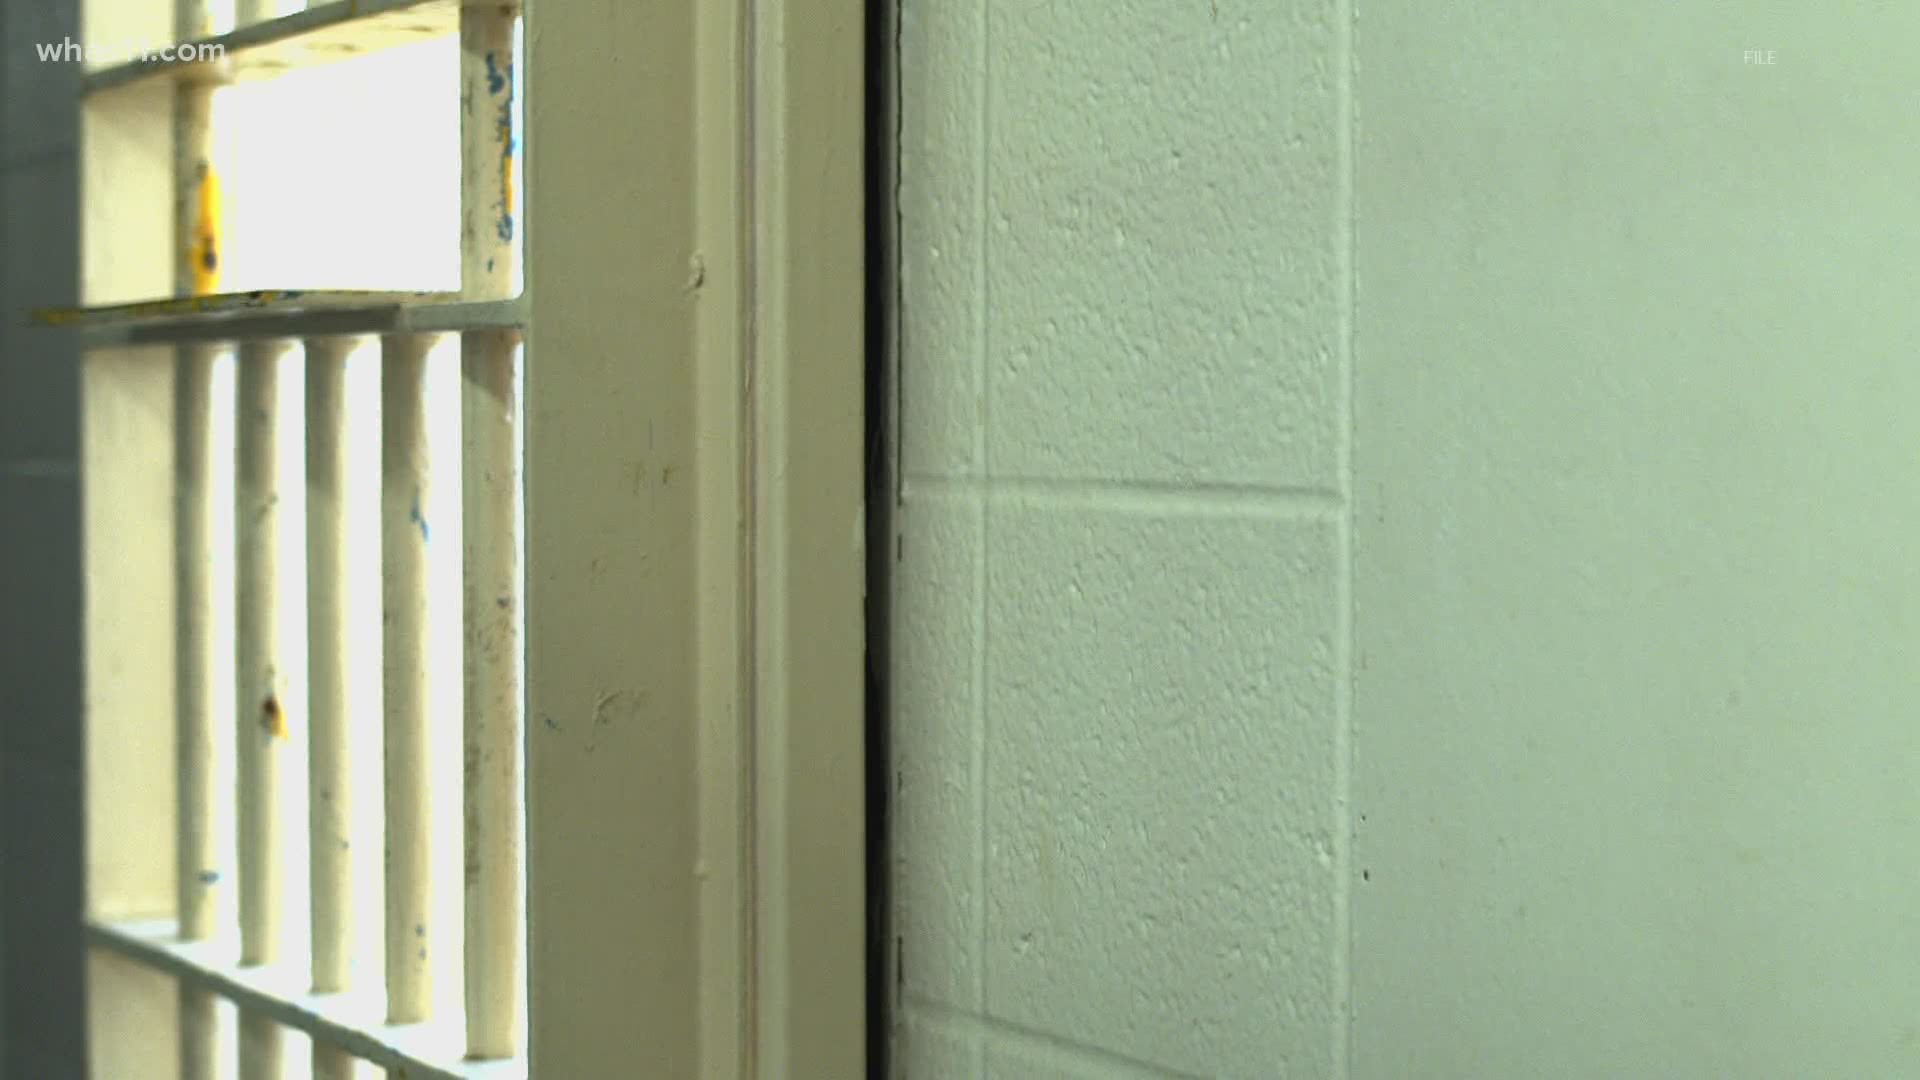 Despite efforts to prevent the spread of COVID-19, inmates at the state prison say they're still living in dangerous conditions.